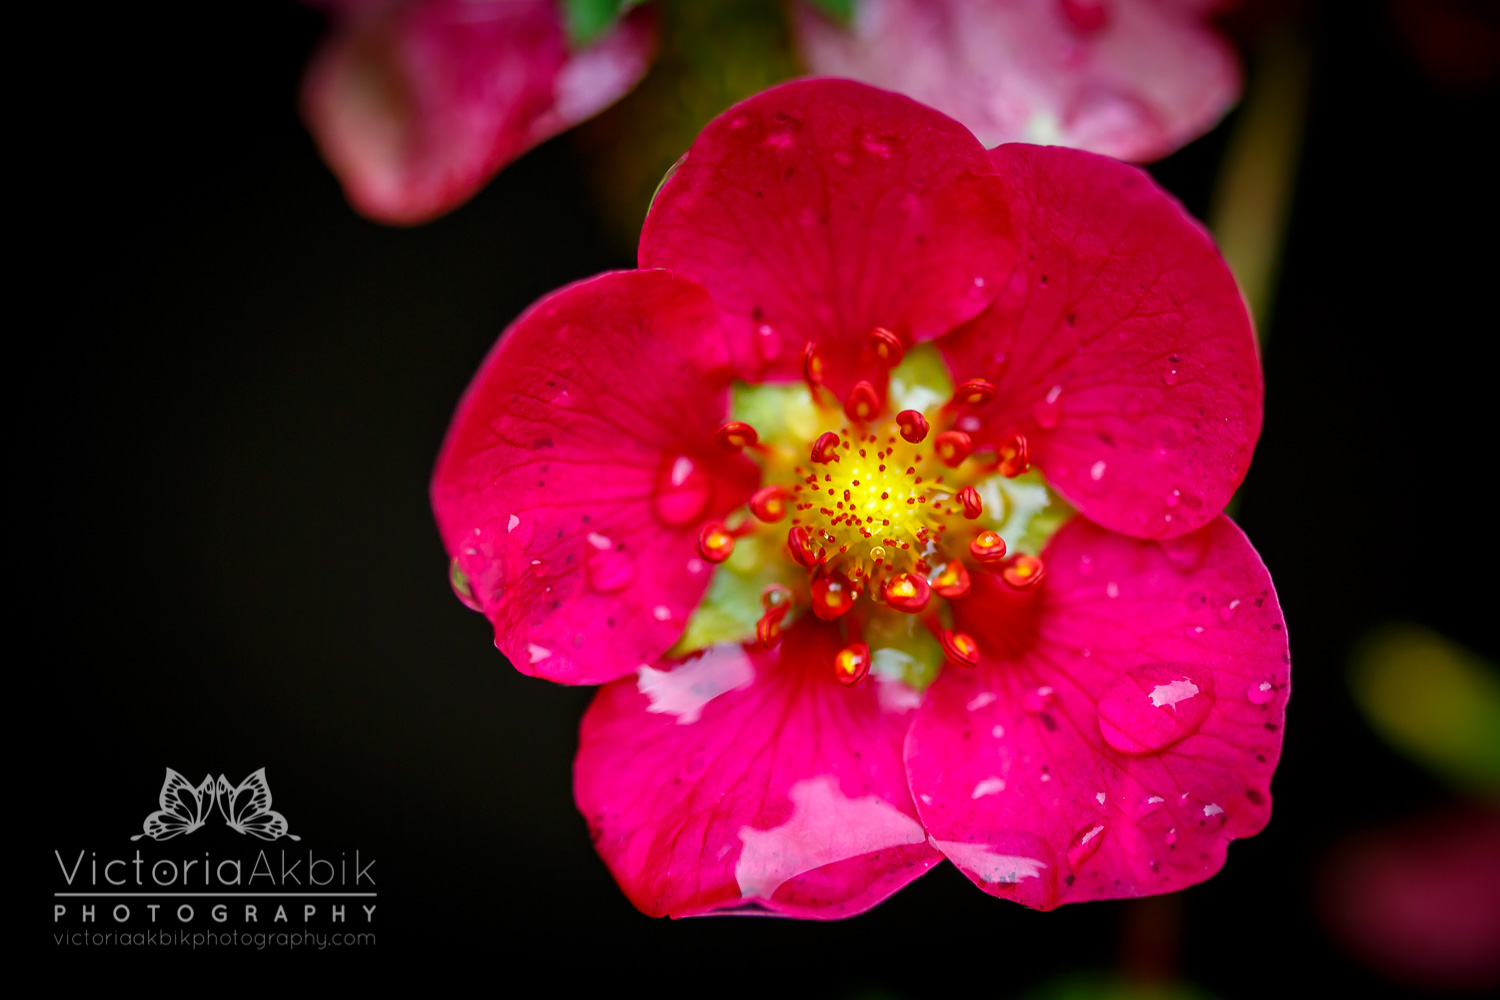 After The Rain | Lifestyle Photography » Victoria Akbik Photography